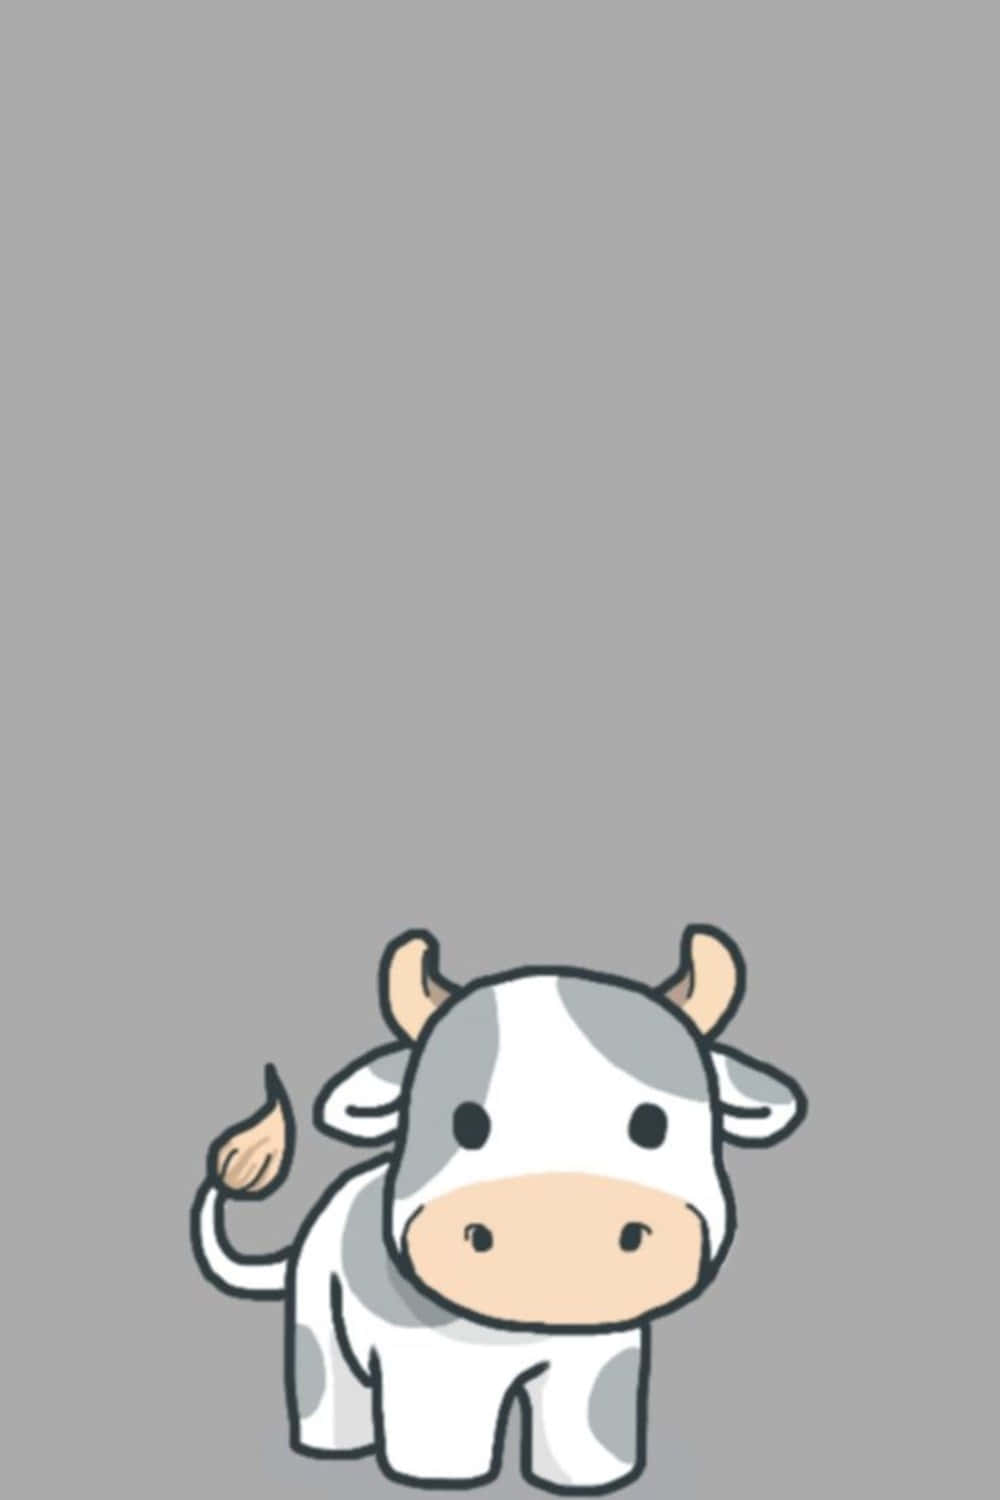 A Cow With Horns On A Gray Background